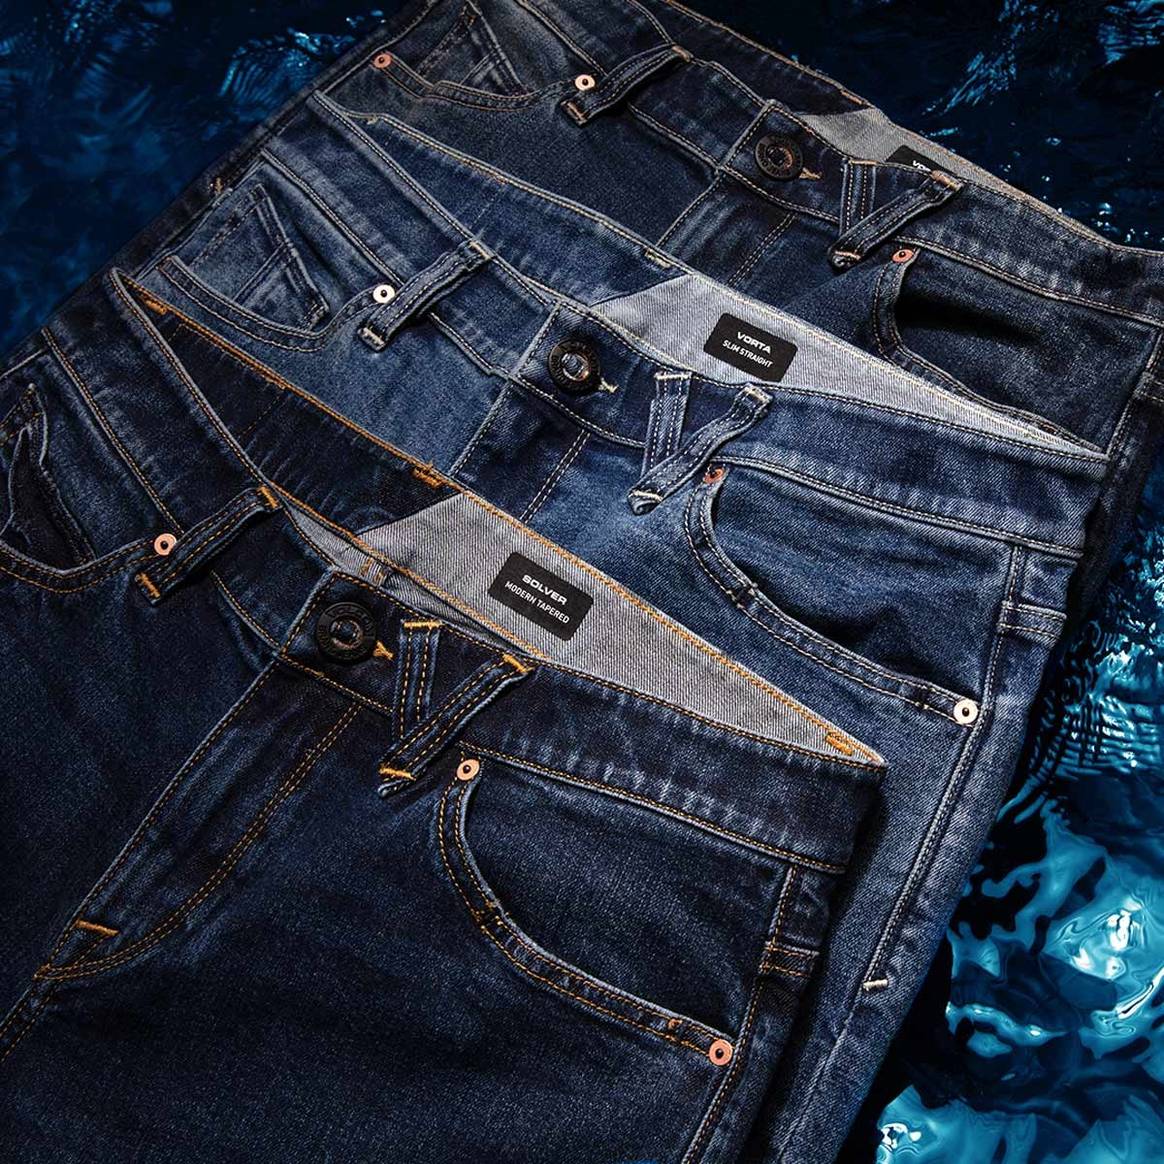 Volcom launches ‘Water Aware’ denim collection